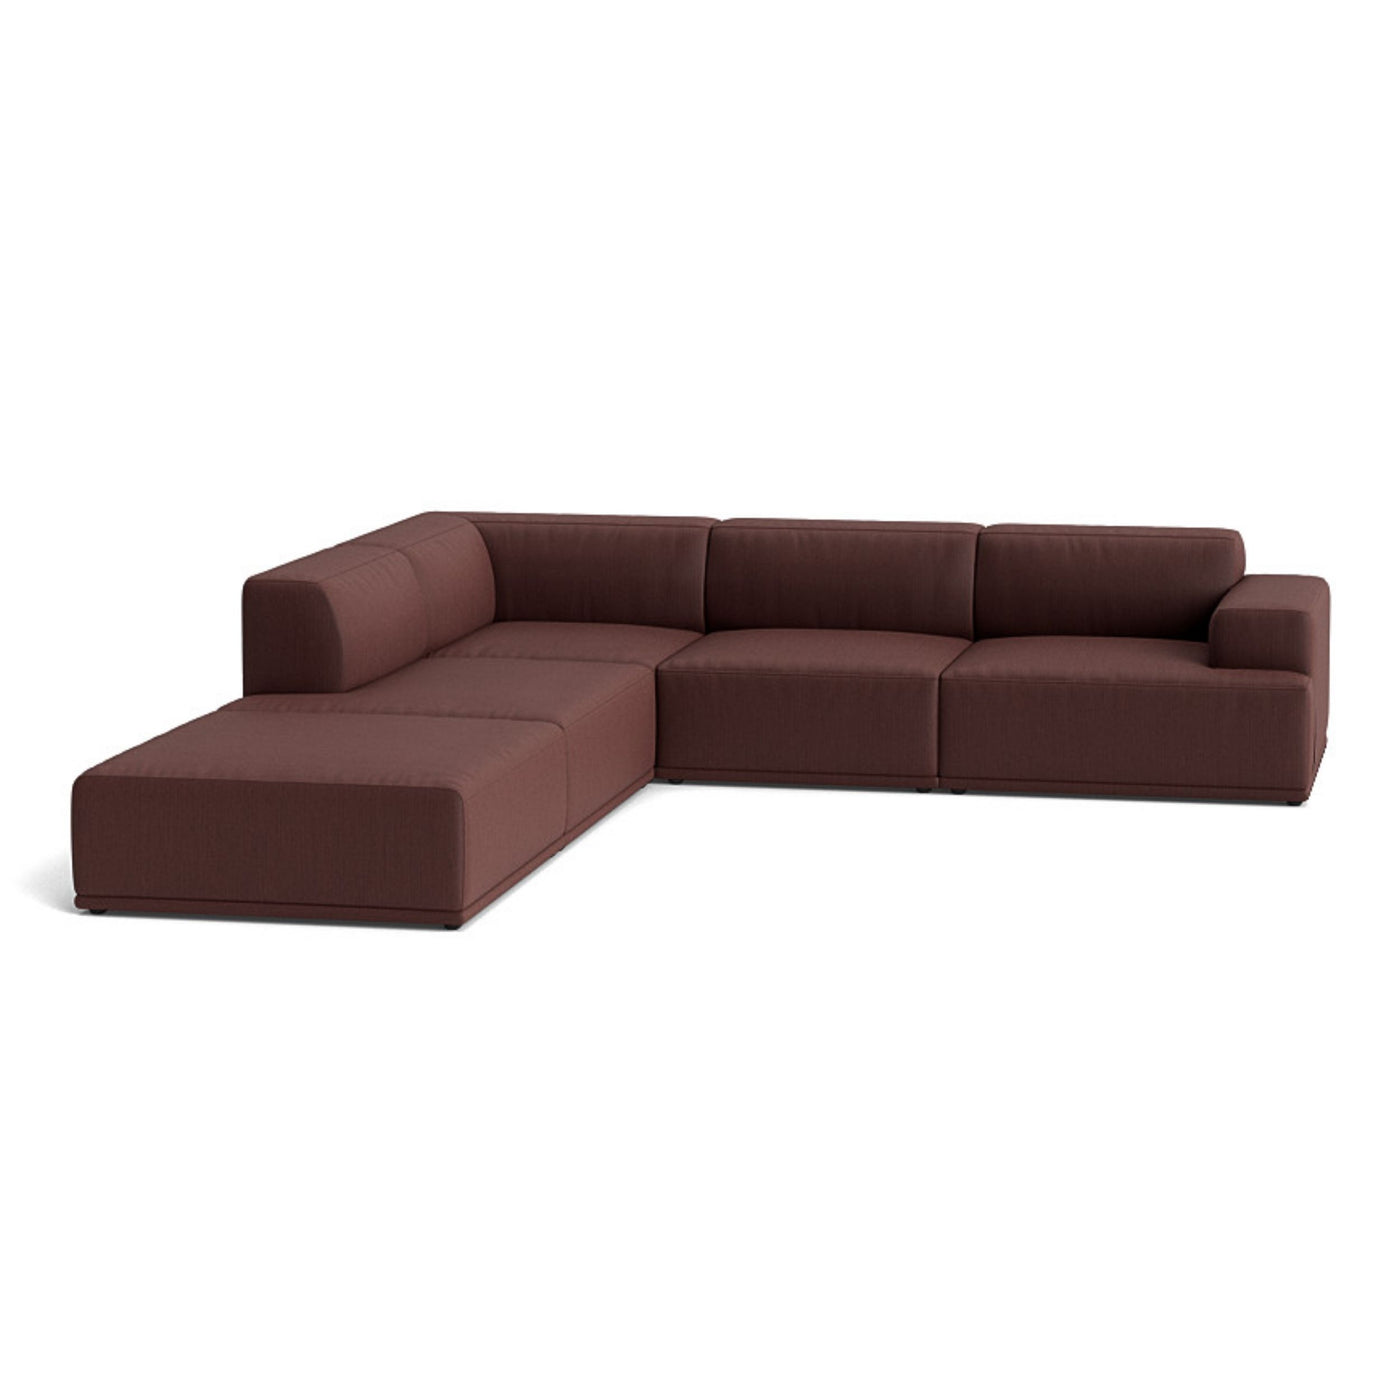 Muuto Connect Soft Modular Corner Sofa, configuration 1. Made-to-order from someday designs. #colour_balder-382